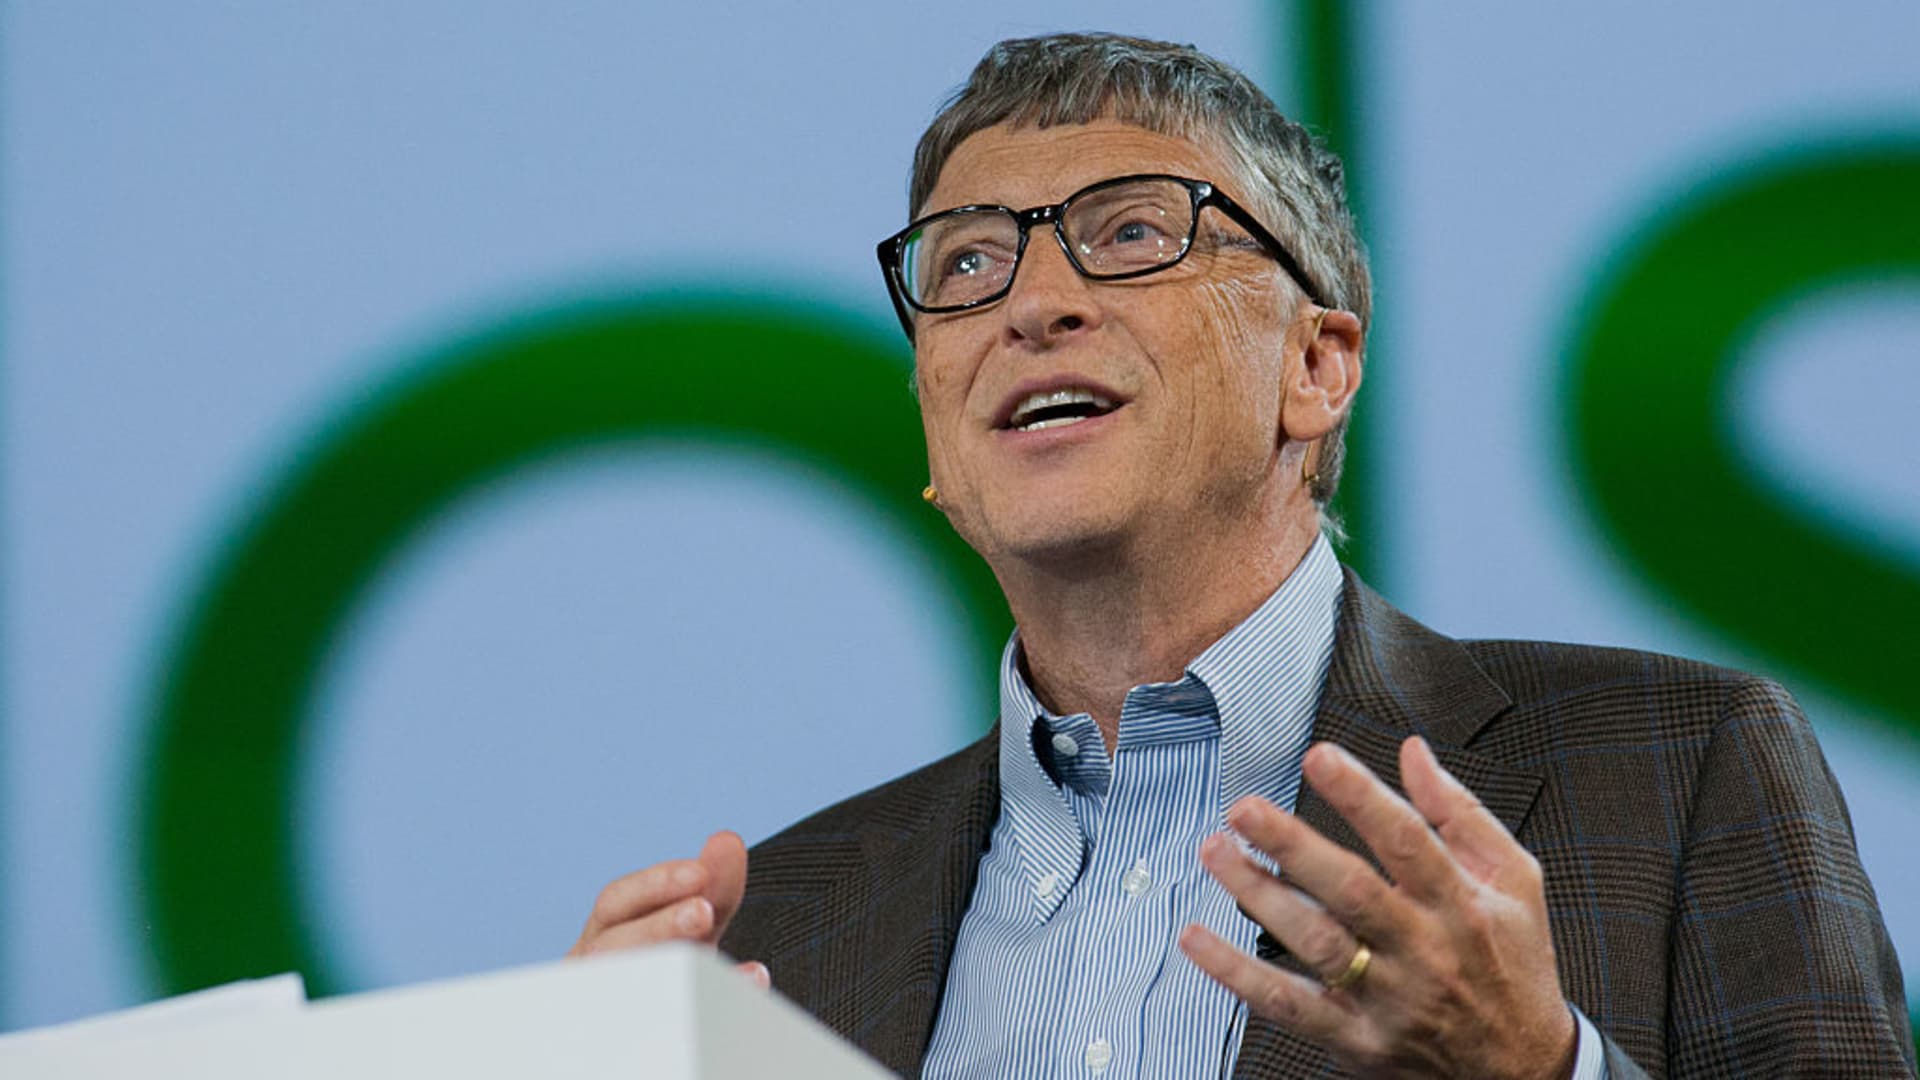 Bill Gates Surprising Commencement Speech: The Billionaire's Regrets, Missed Vacations, Broken Relationships, and the Power of Cutting Yourself Some Slack